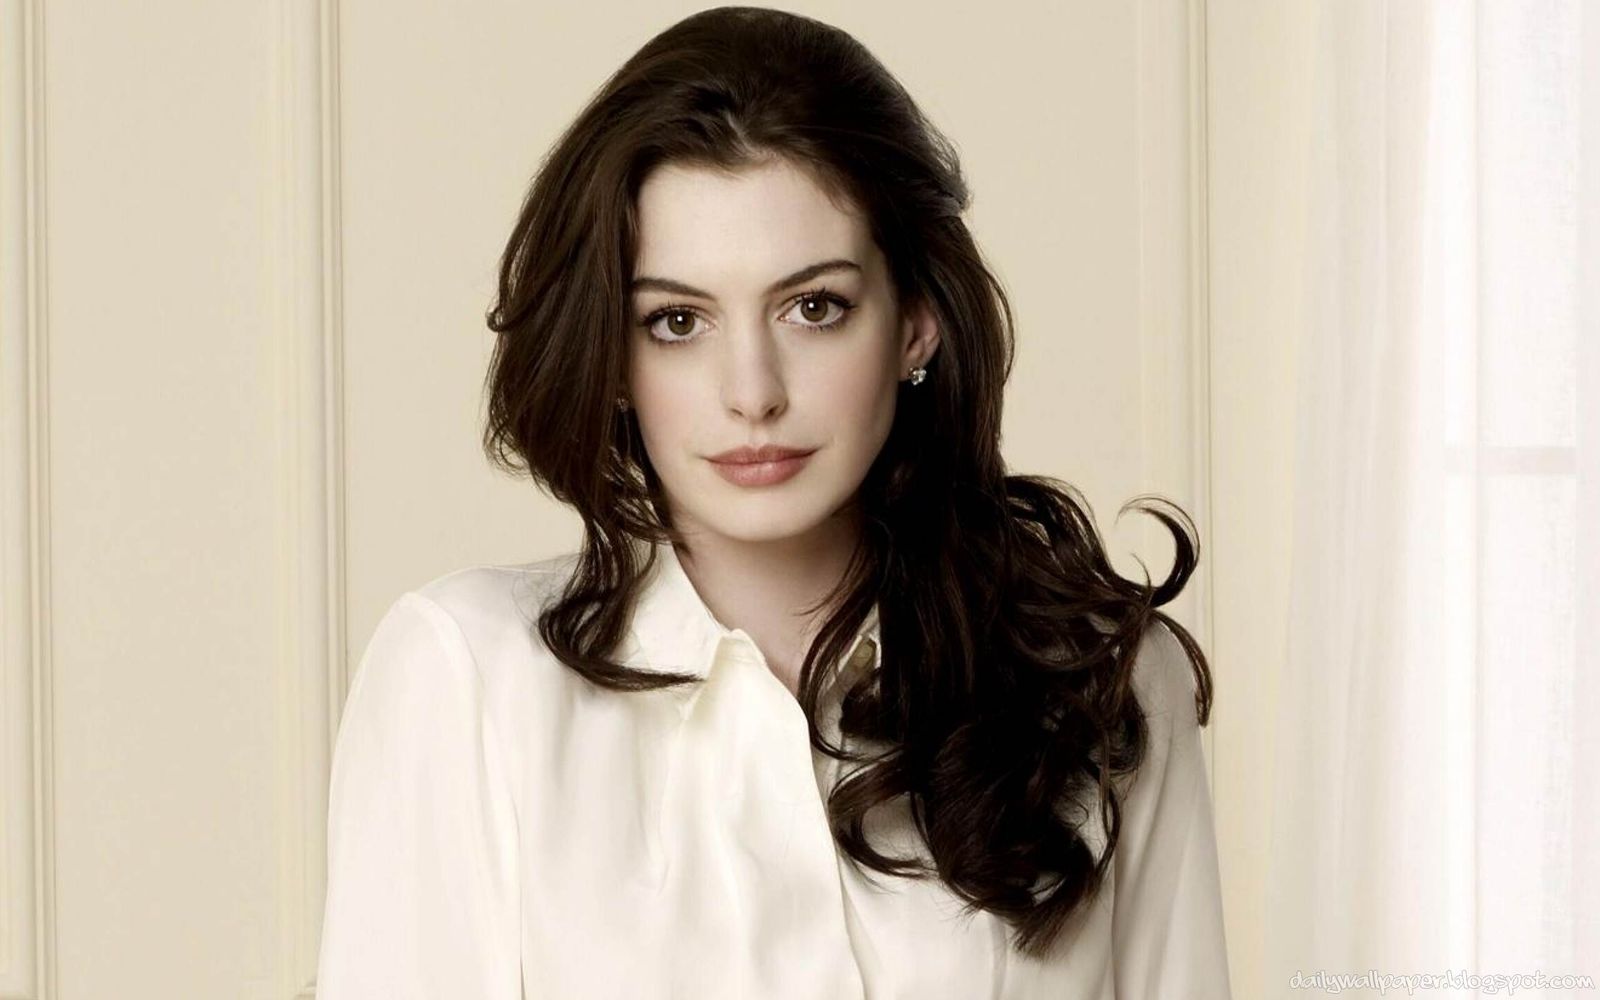 Anne Hathaway Wants To Stay At Home With Her Baby